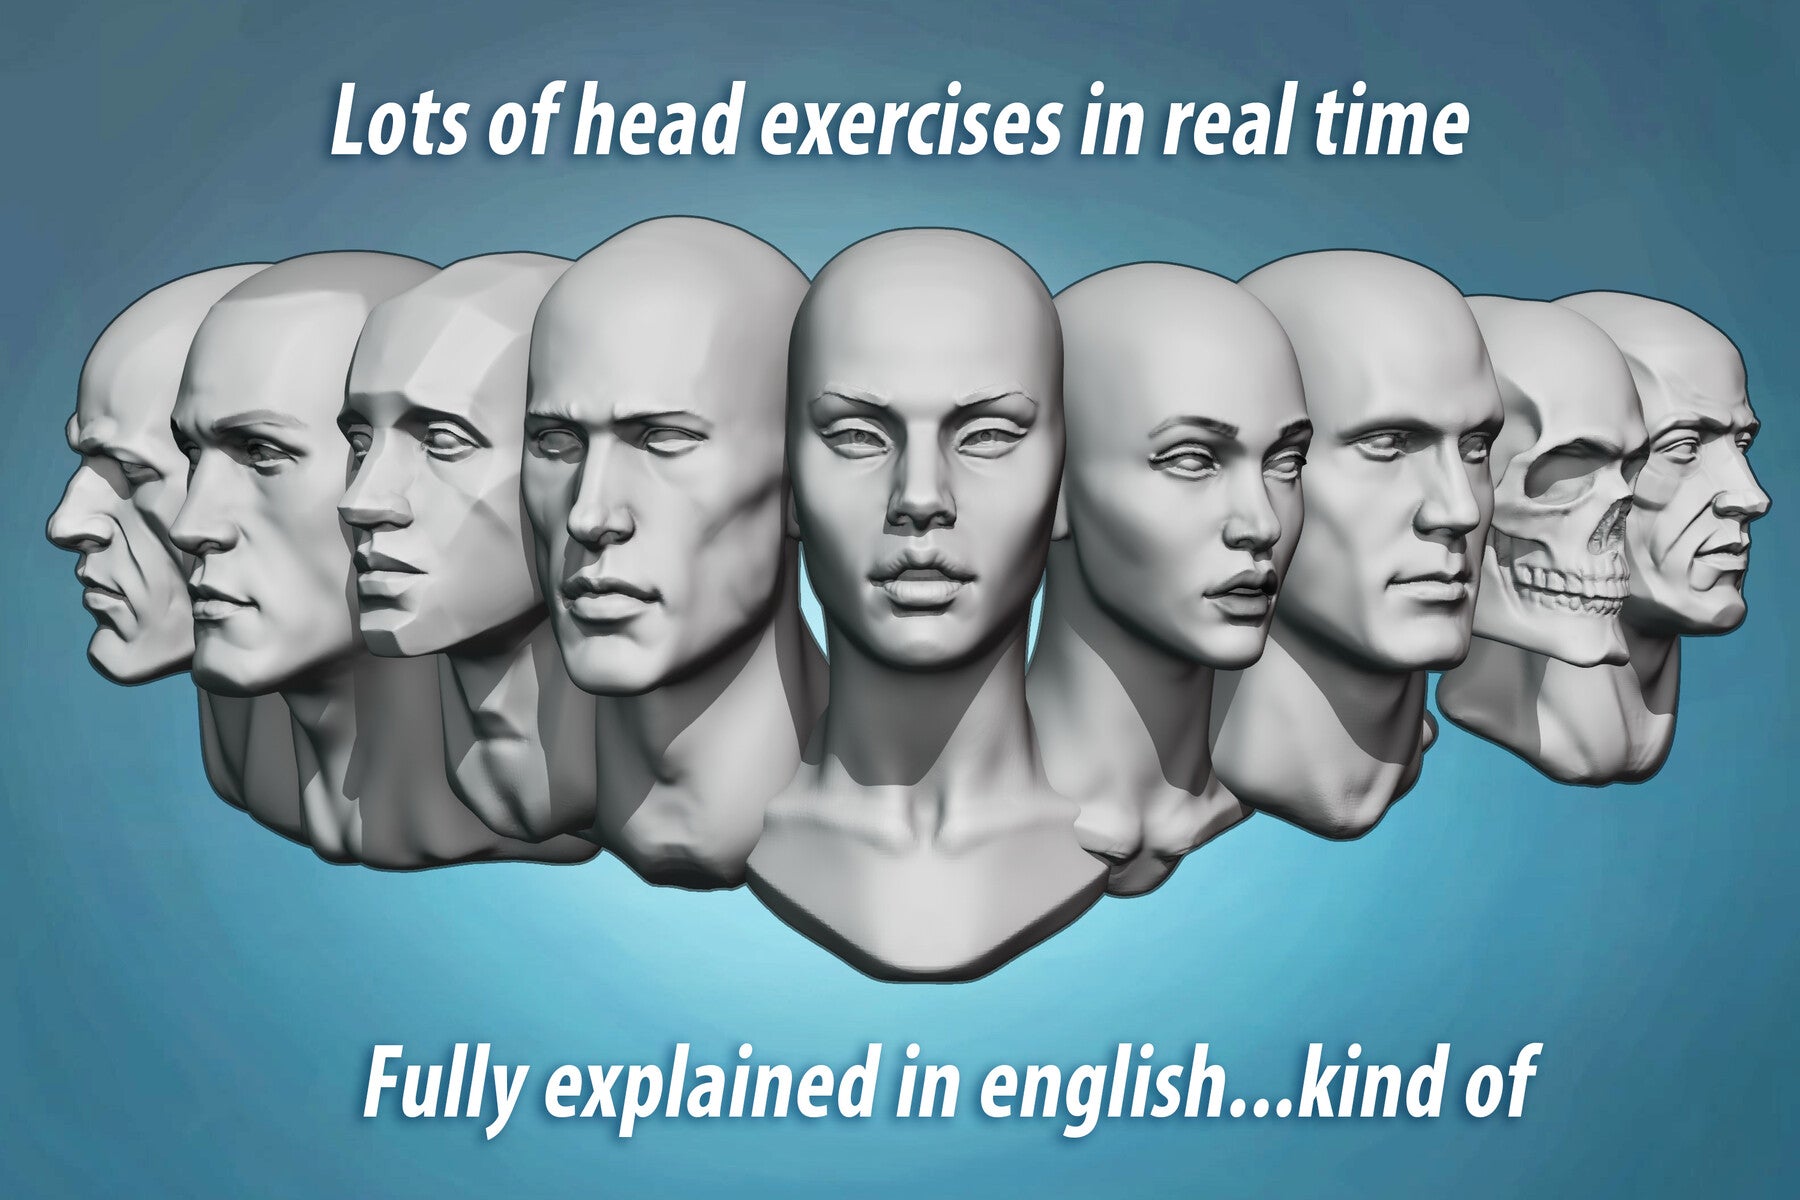 Head Anatomy and Sculpting Exercises